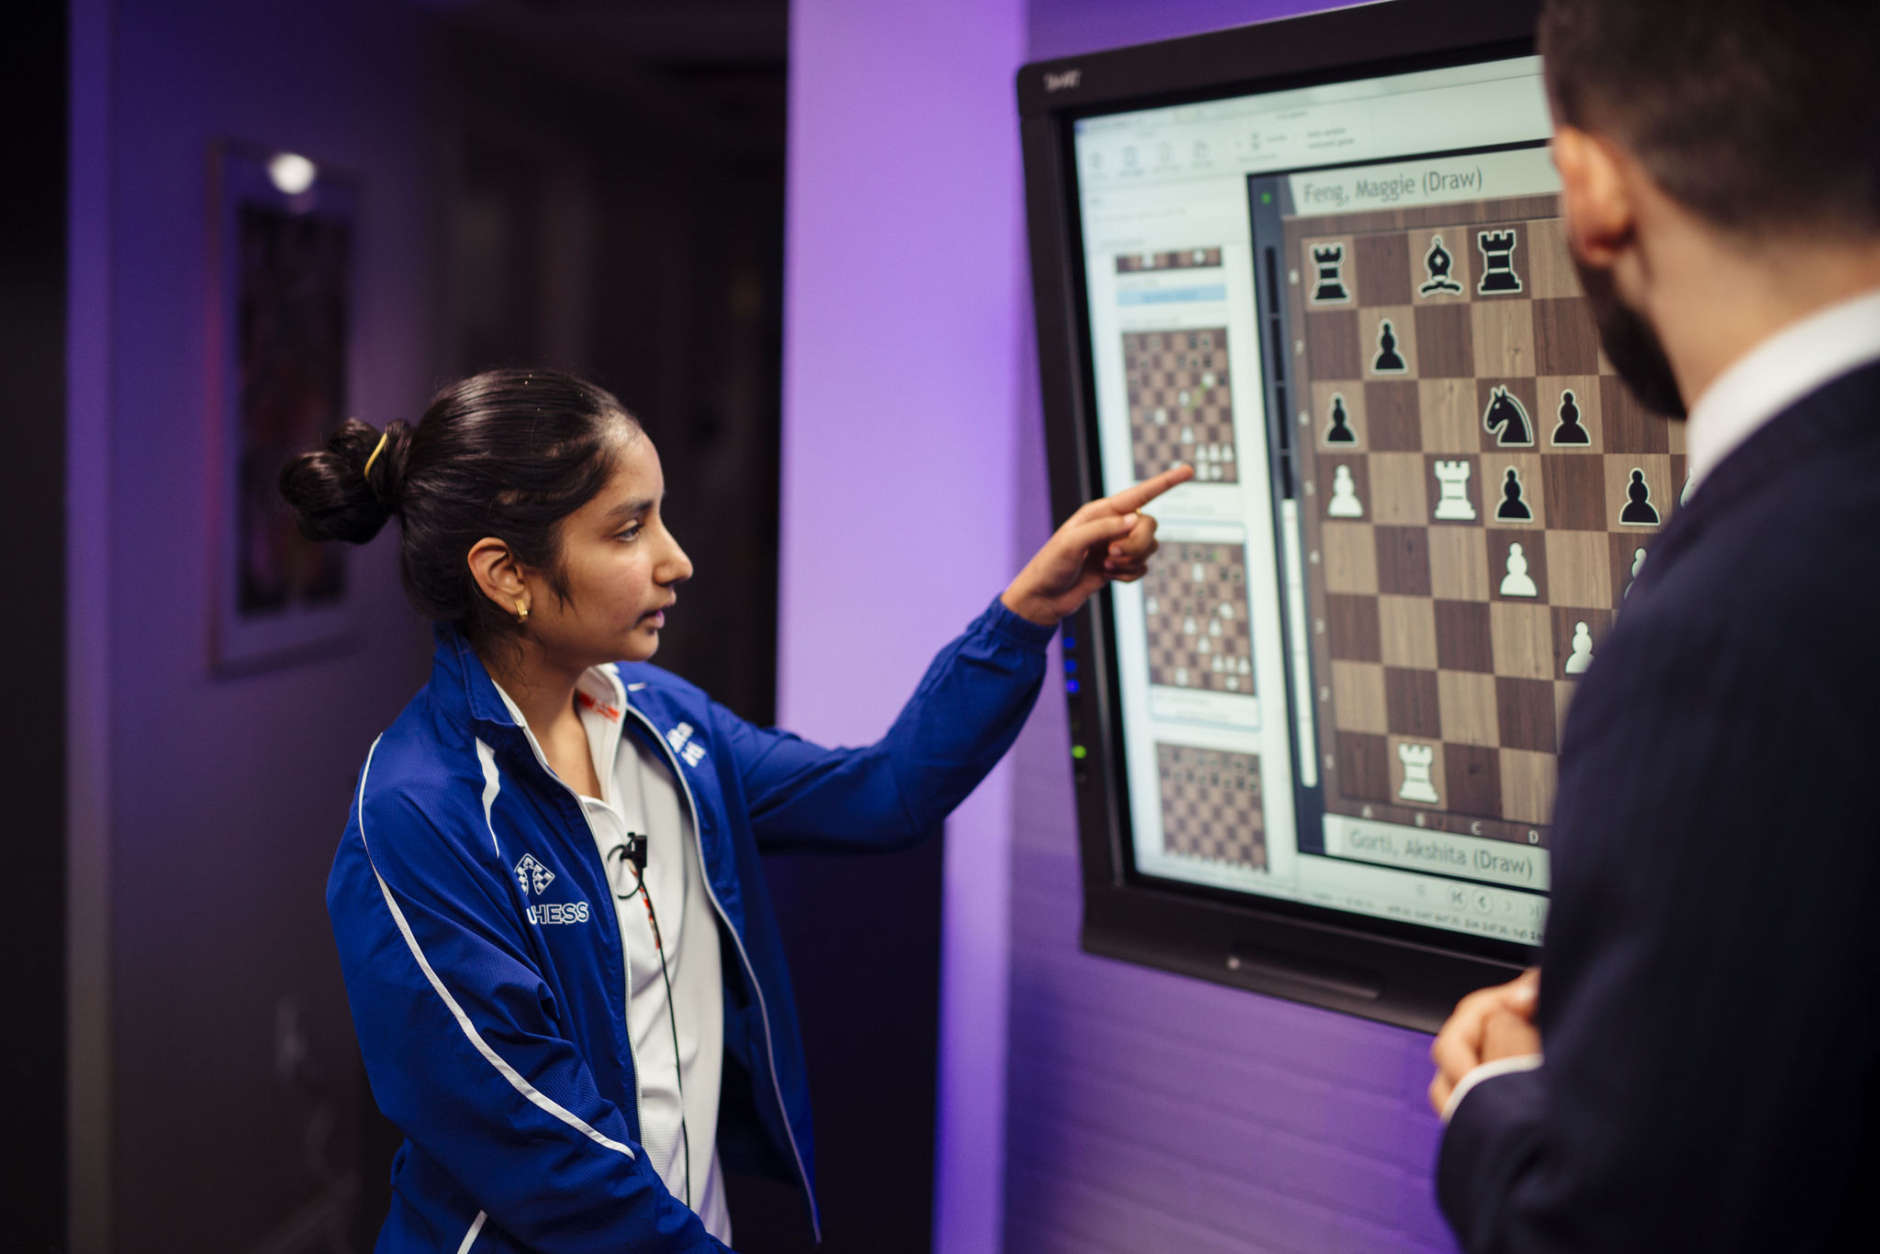 Akshita Gorti discusses her chess strategy following Round 8 of the U.S. Girls’ Junior Championship. (Austin Fuller/Chess Club and Scholastic Center of St. Louis)